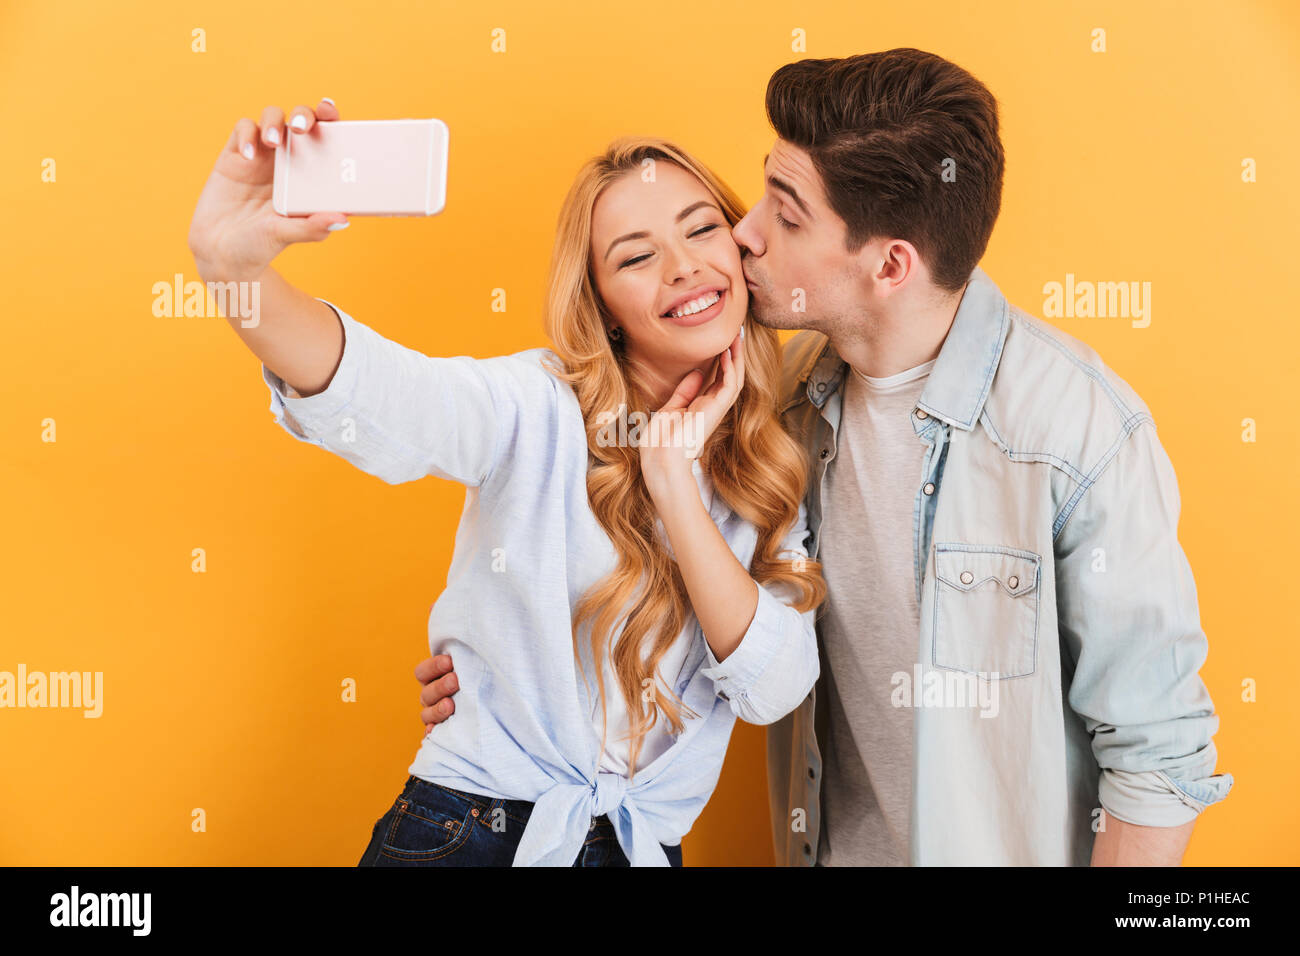 Portrait of lovely couple taking selfie photo on mobile phone while man kissing woman on cheek isolated over yellow background Stock Photo